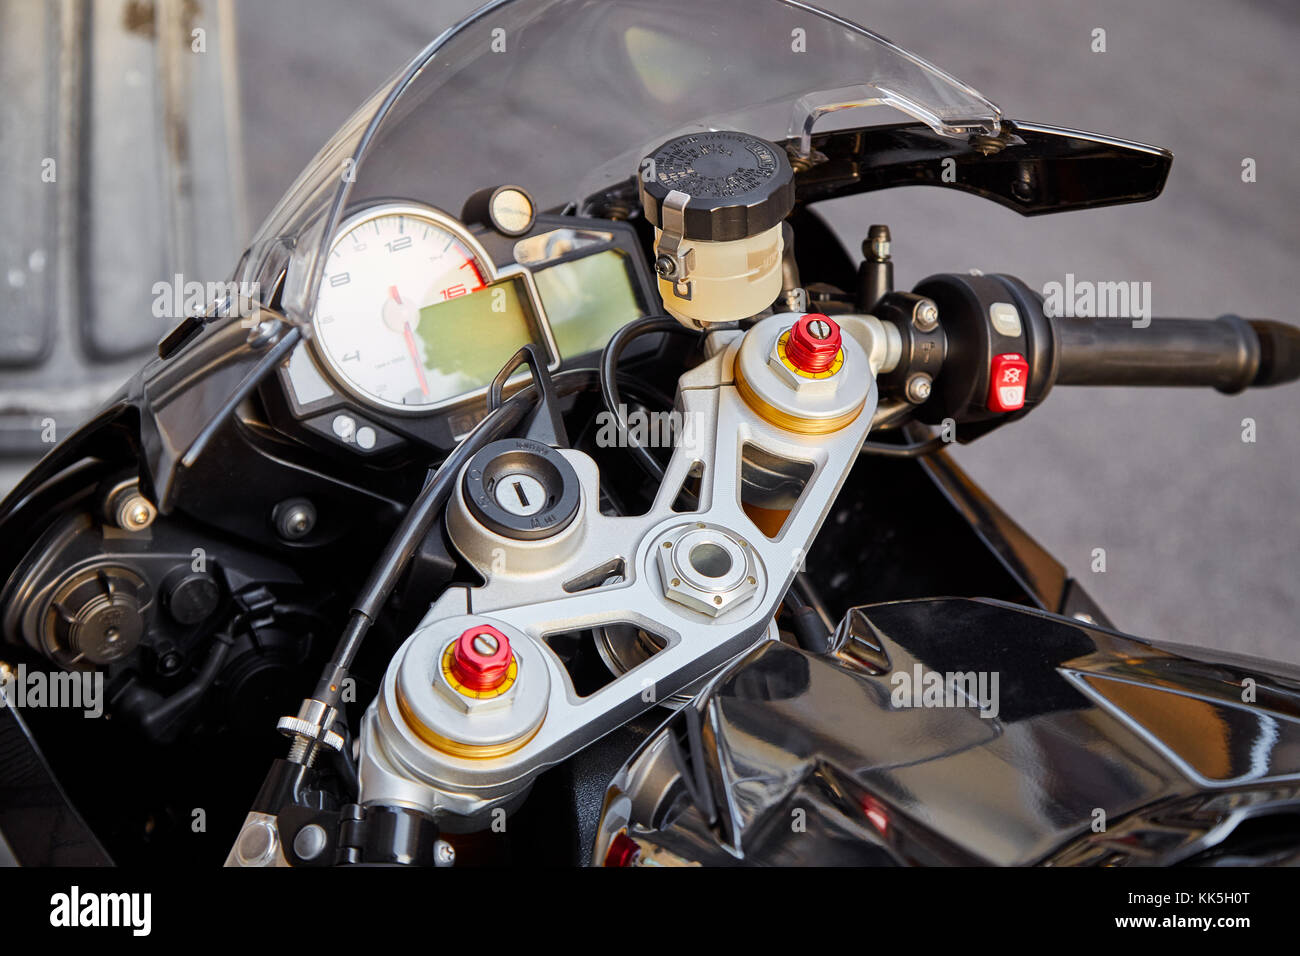 Steering wheel and dashboard of a modern sports motorcycle Stock Photo